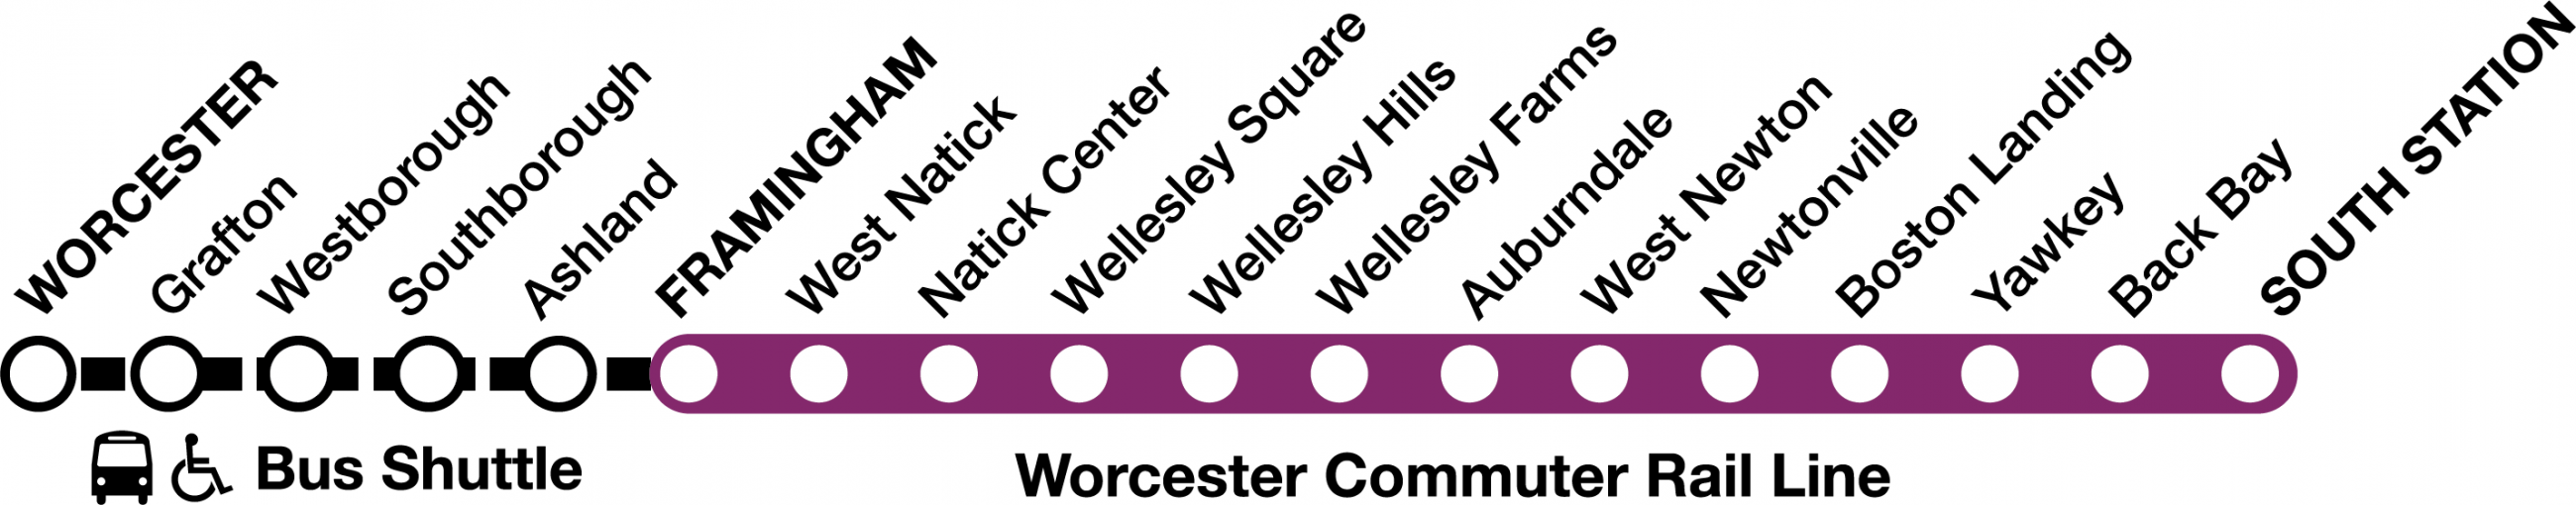 For weekends May 26 to June 17, bus shuttles replace train service between Worcester and Framingham stations.